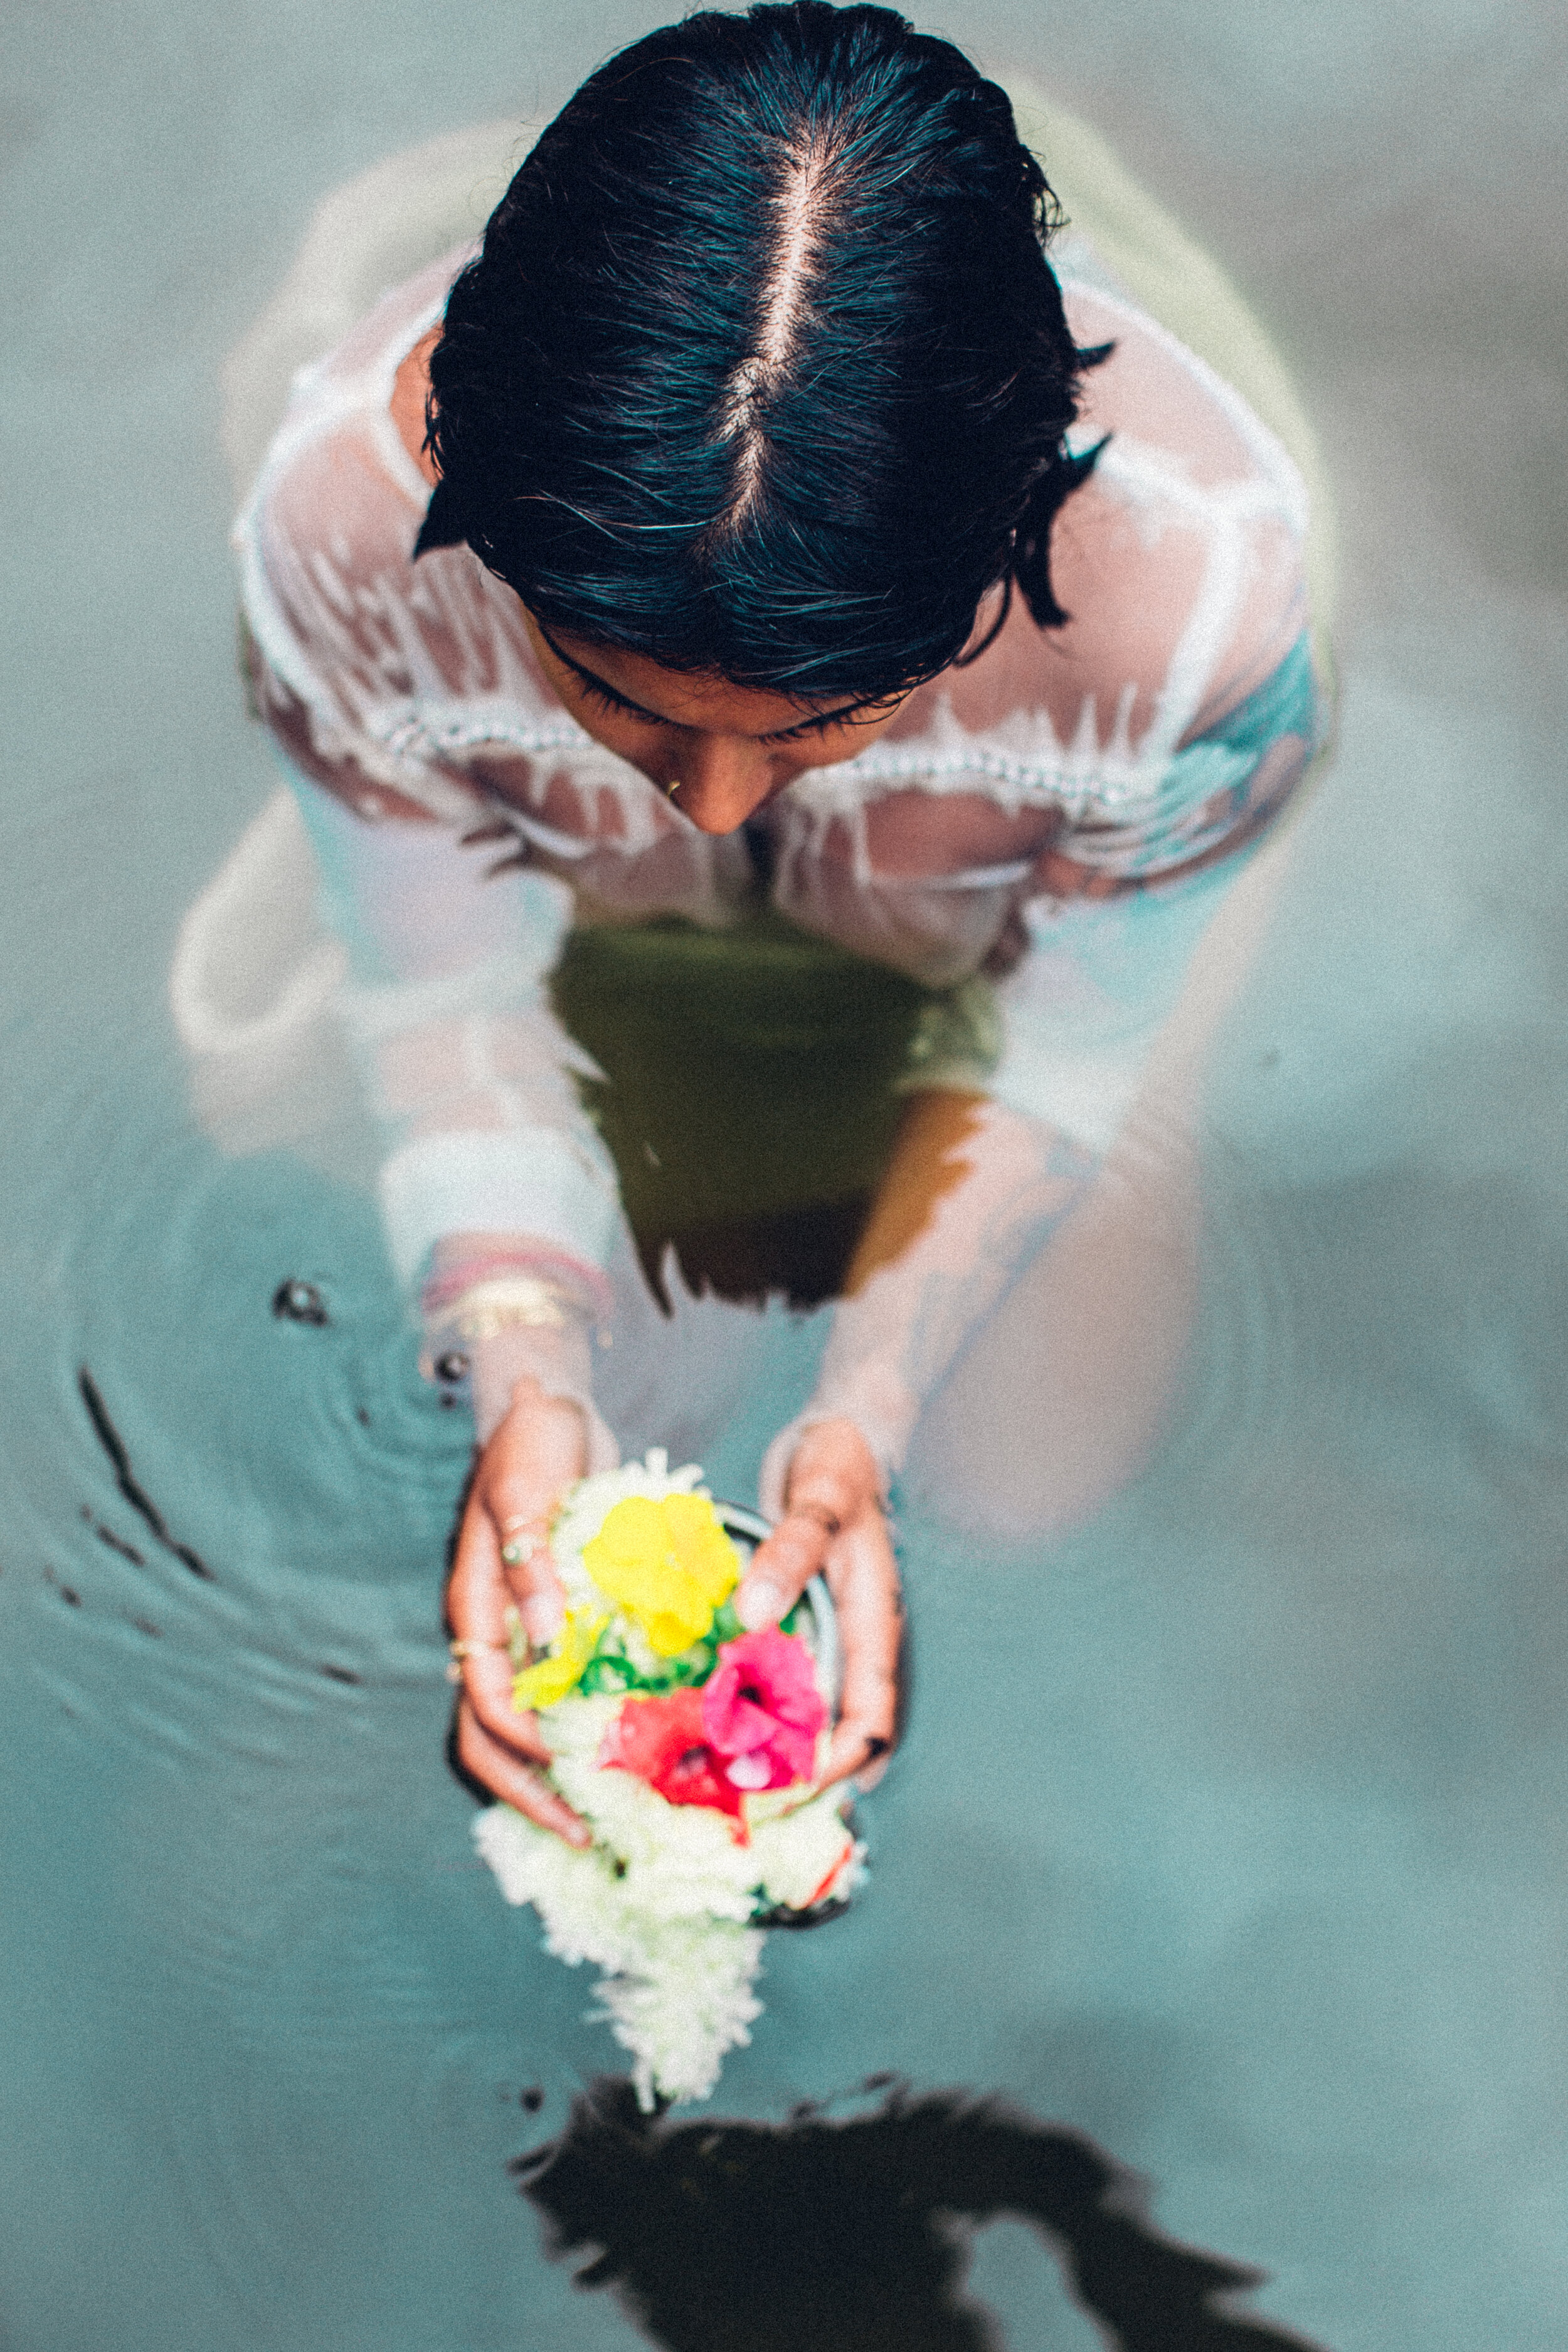  Image description: Angle above a woman sitting in water holding flowers.  